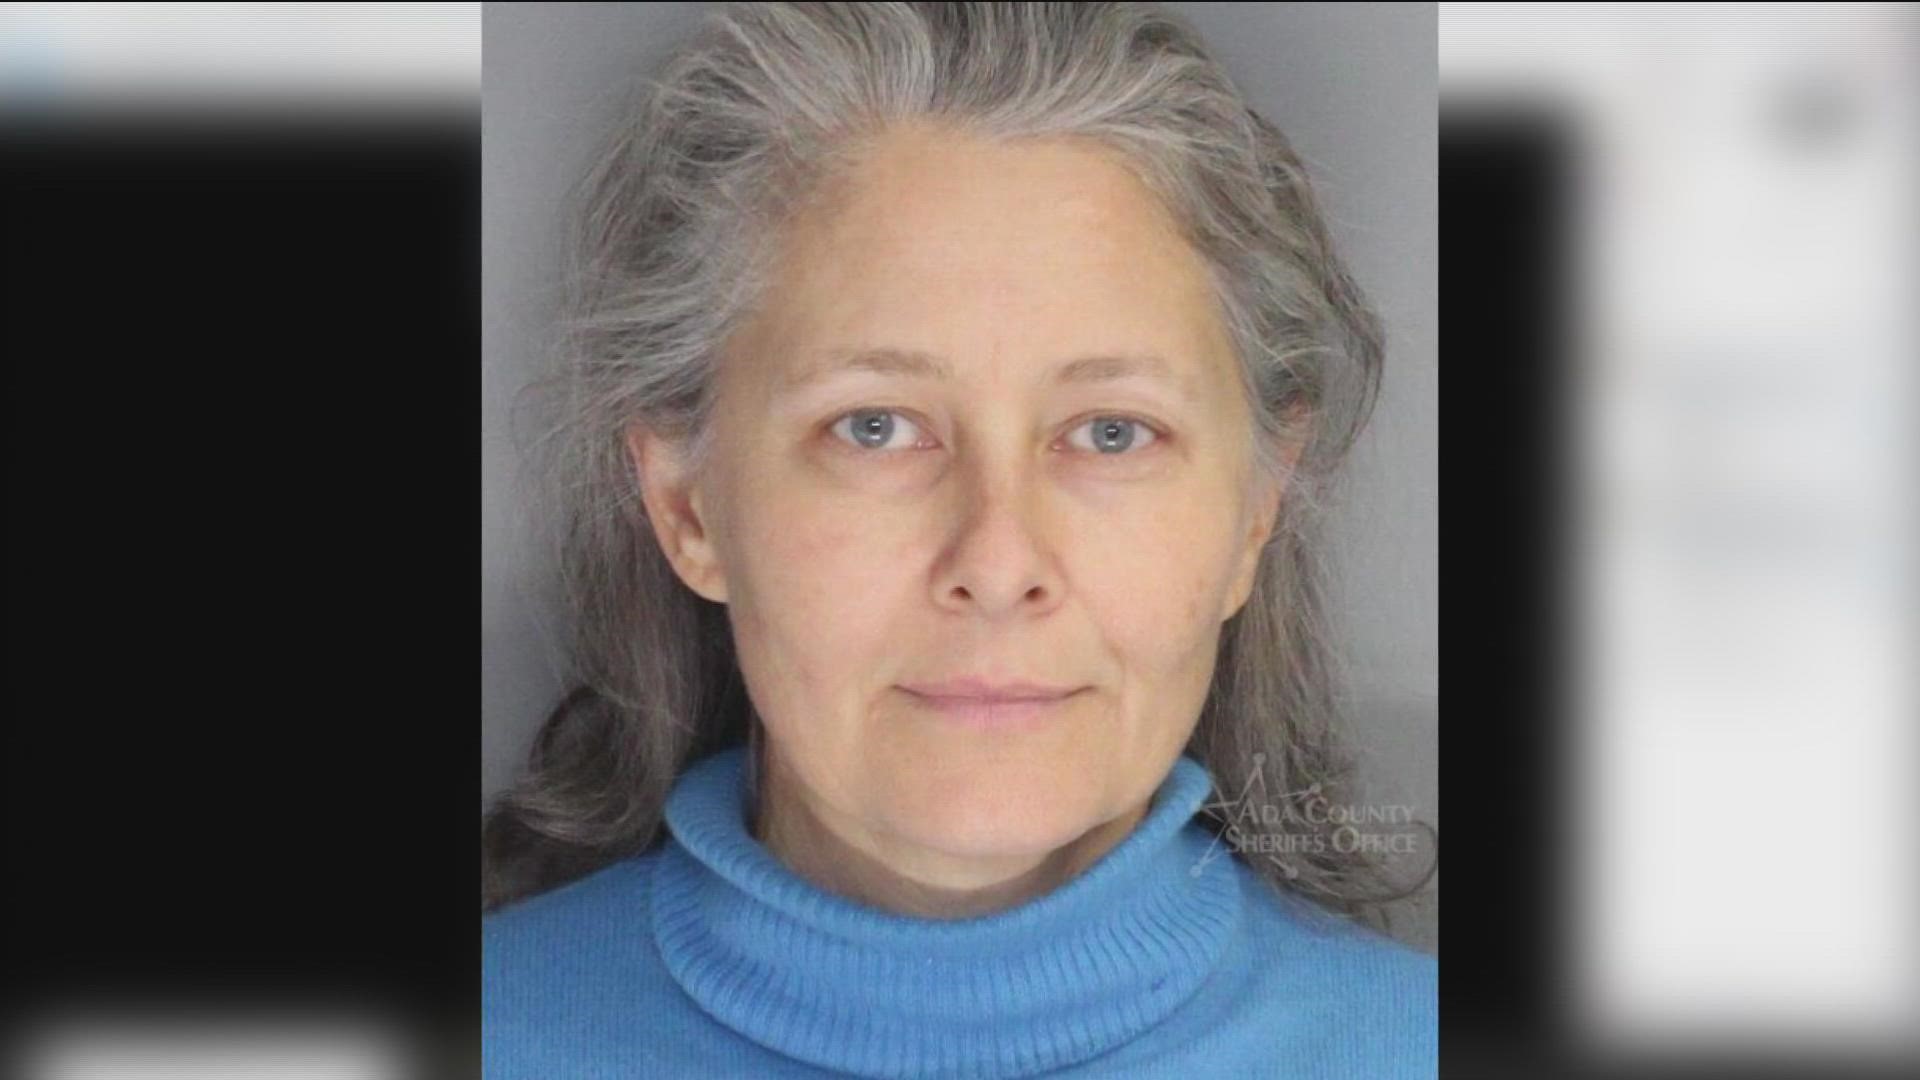 Susan Lang, who took part in a protest outside Diana Lachiondo's home in December 2020, was sentenced on Wednesday to a misdemeanor for disturbing the peace.